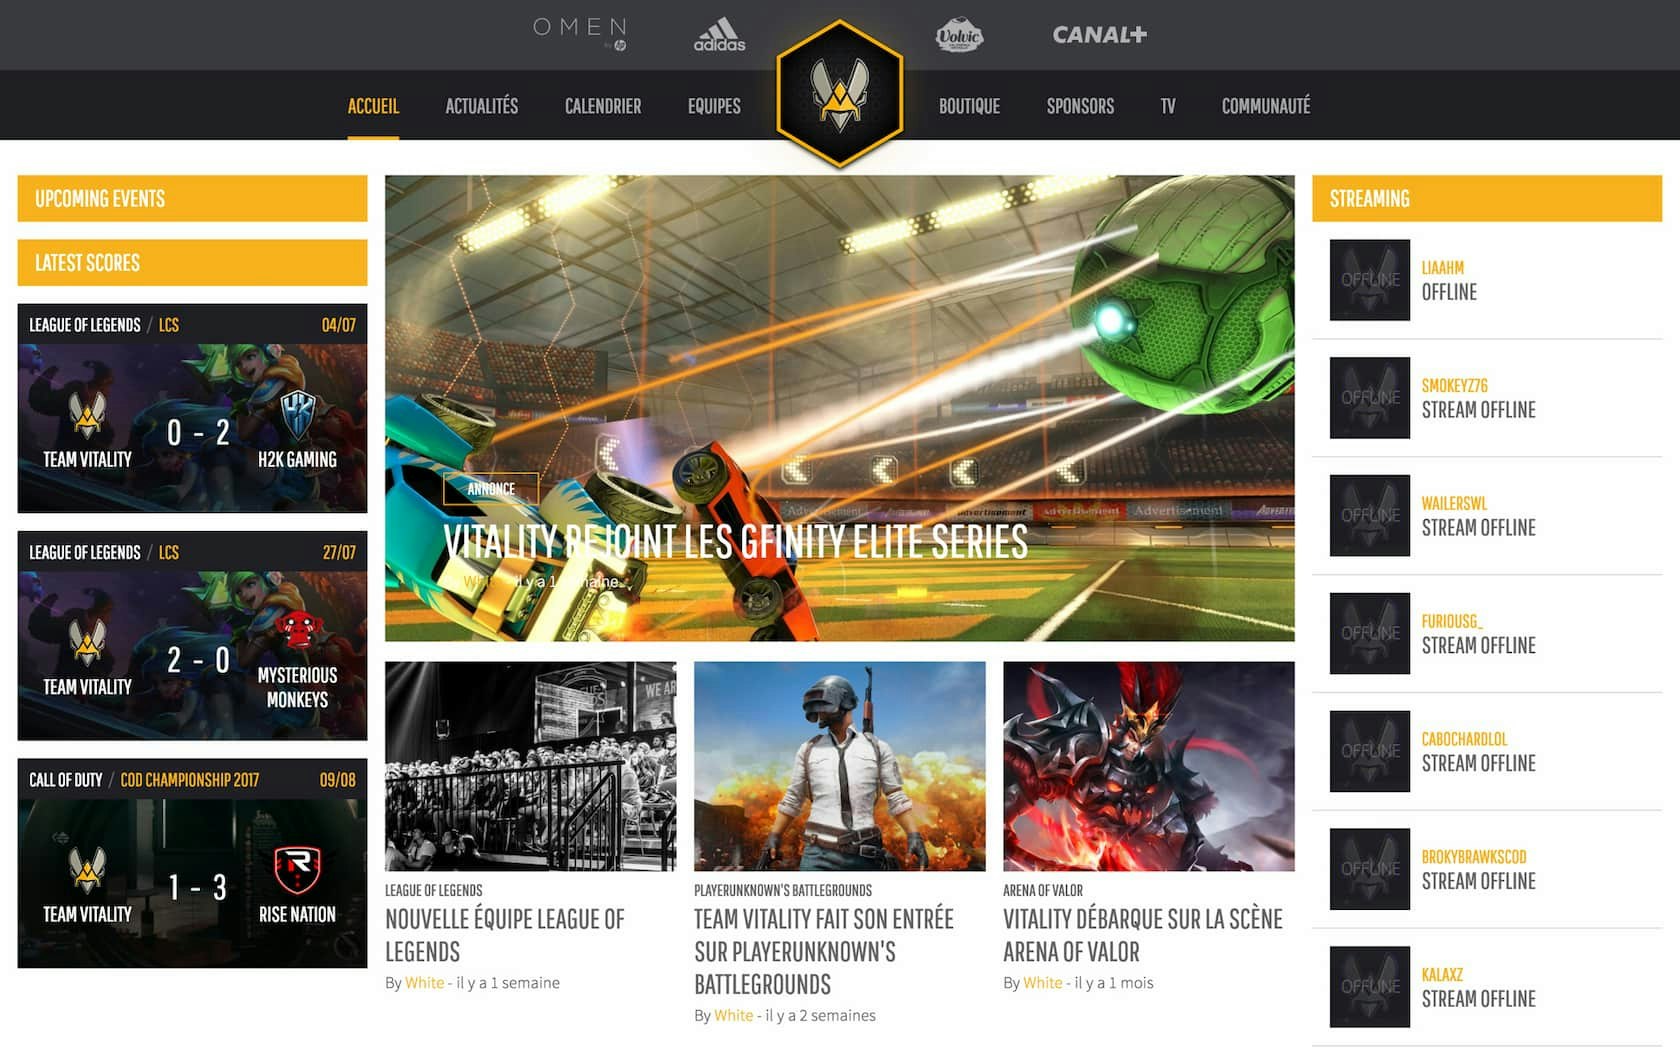 Team Vitality website, vitality.gg, onligne from 2018 to late 2019